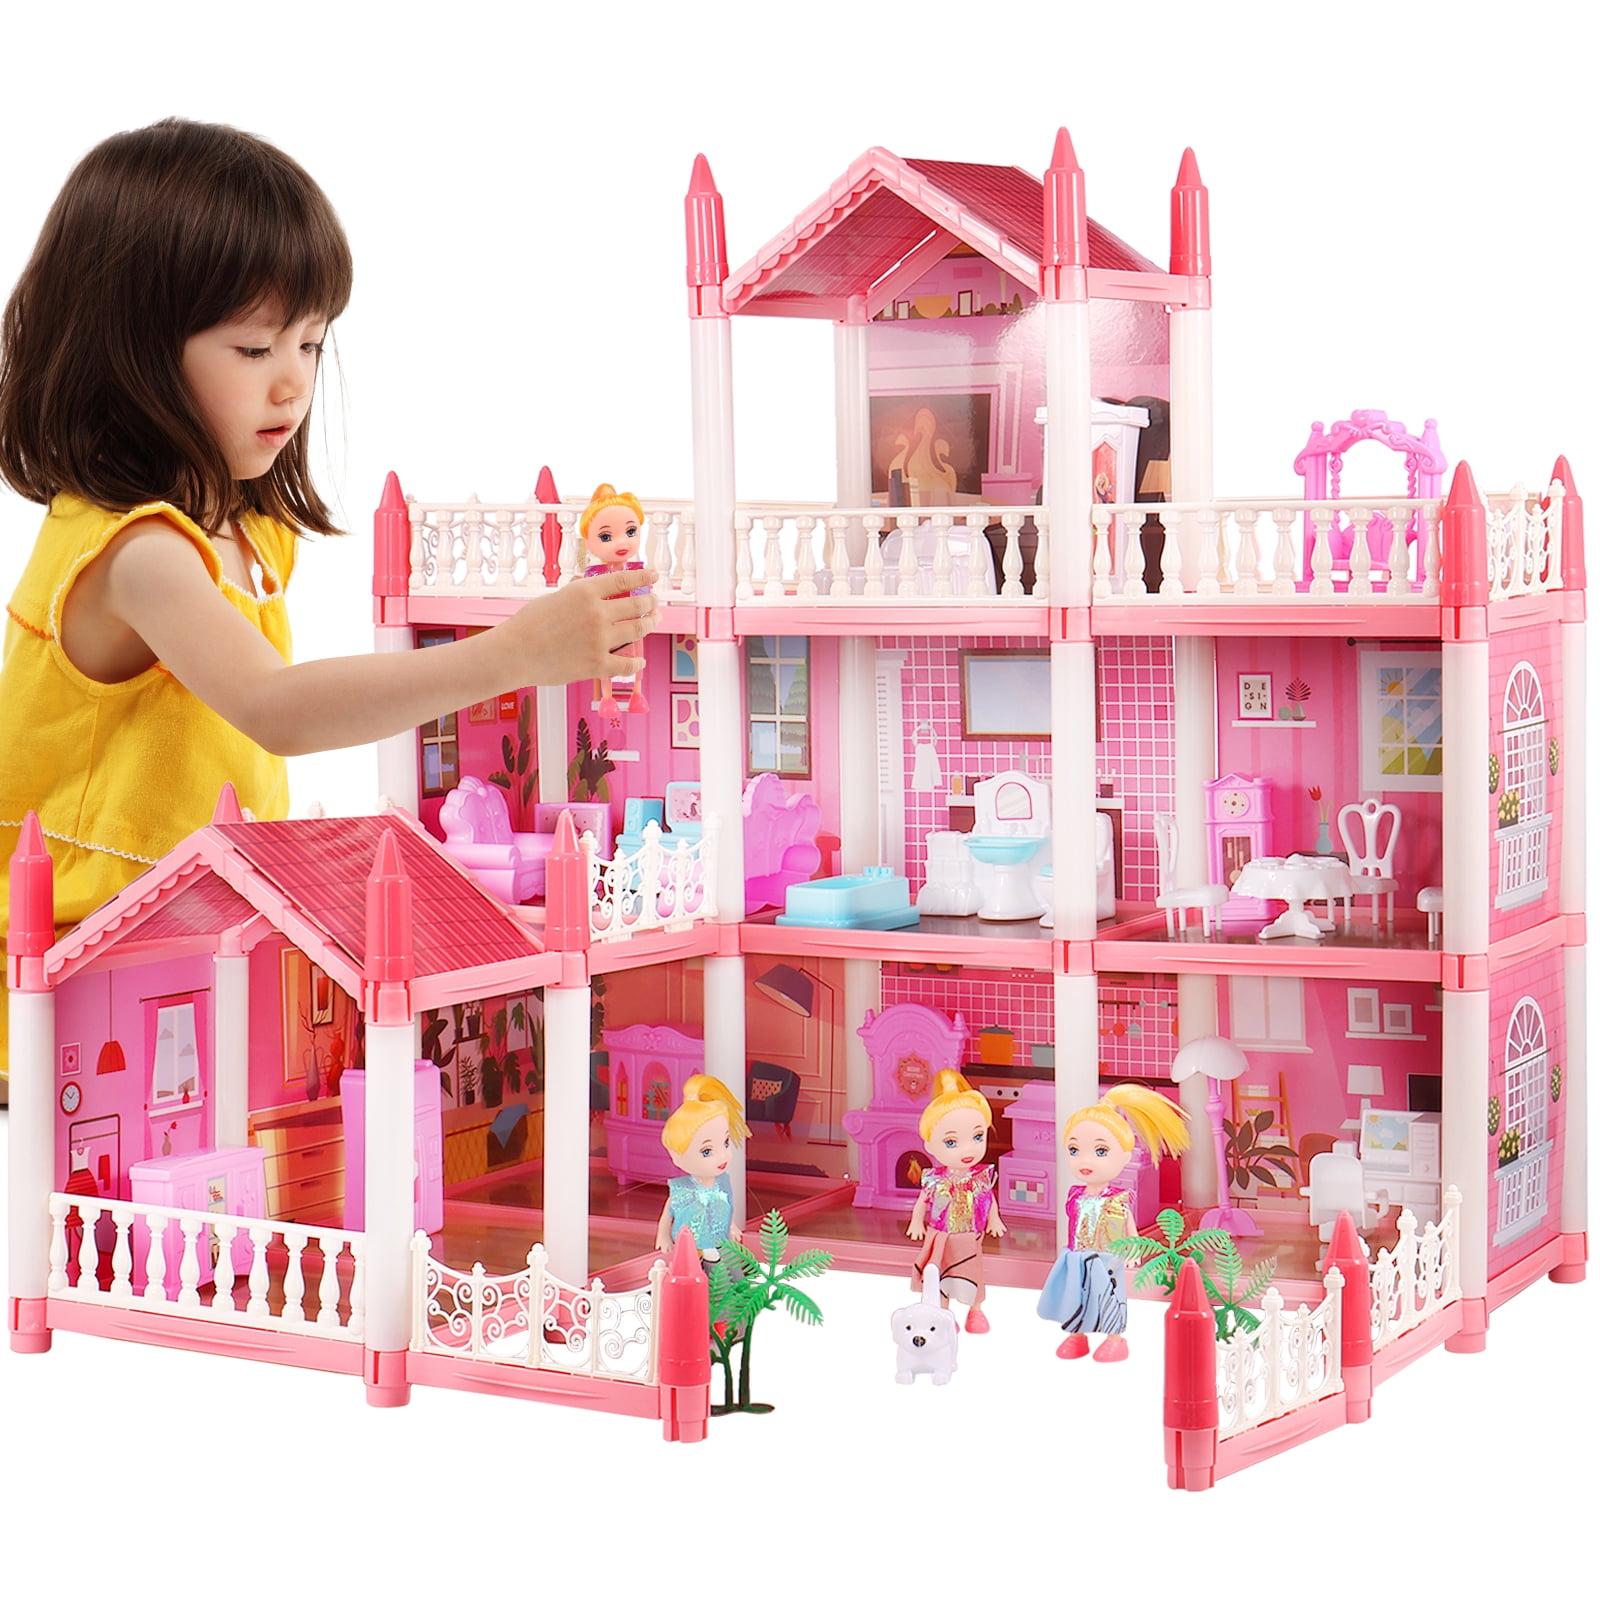 12 Doll House Games and Ideas - TinkerLab